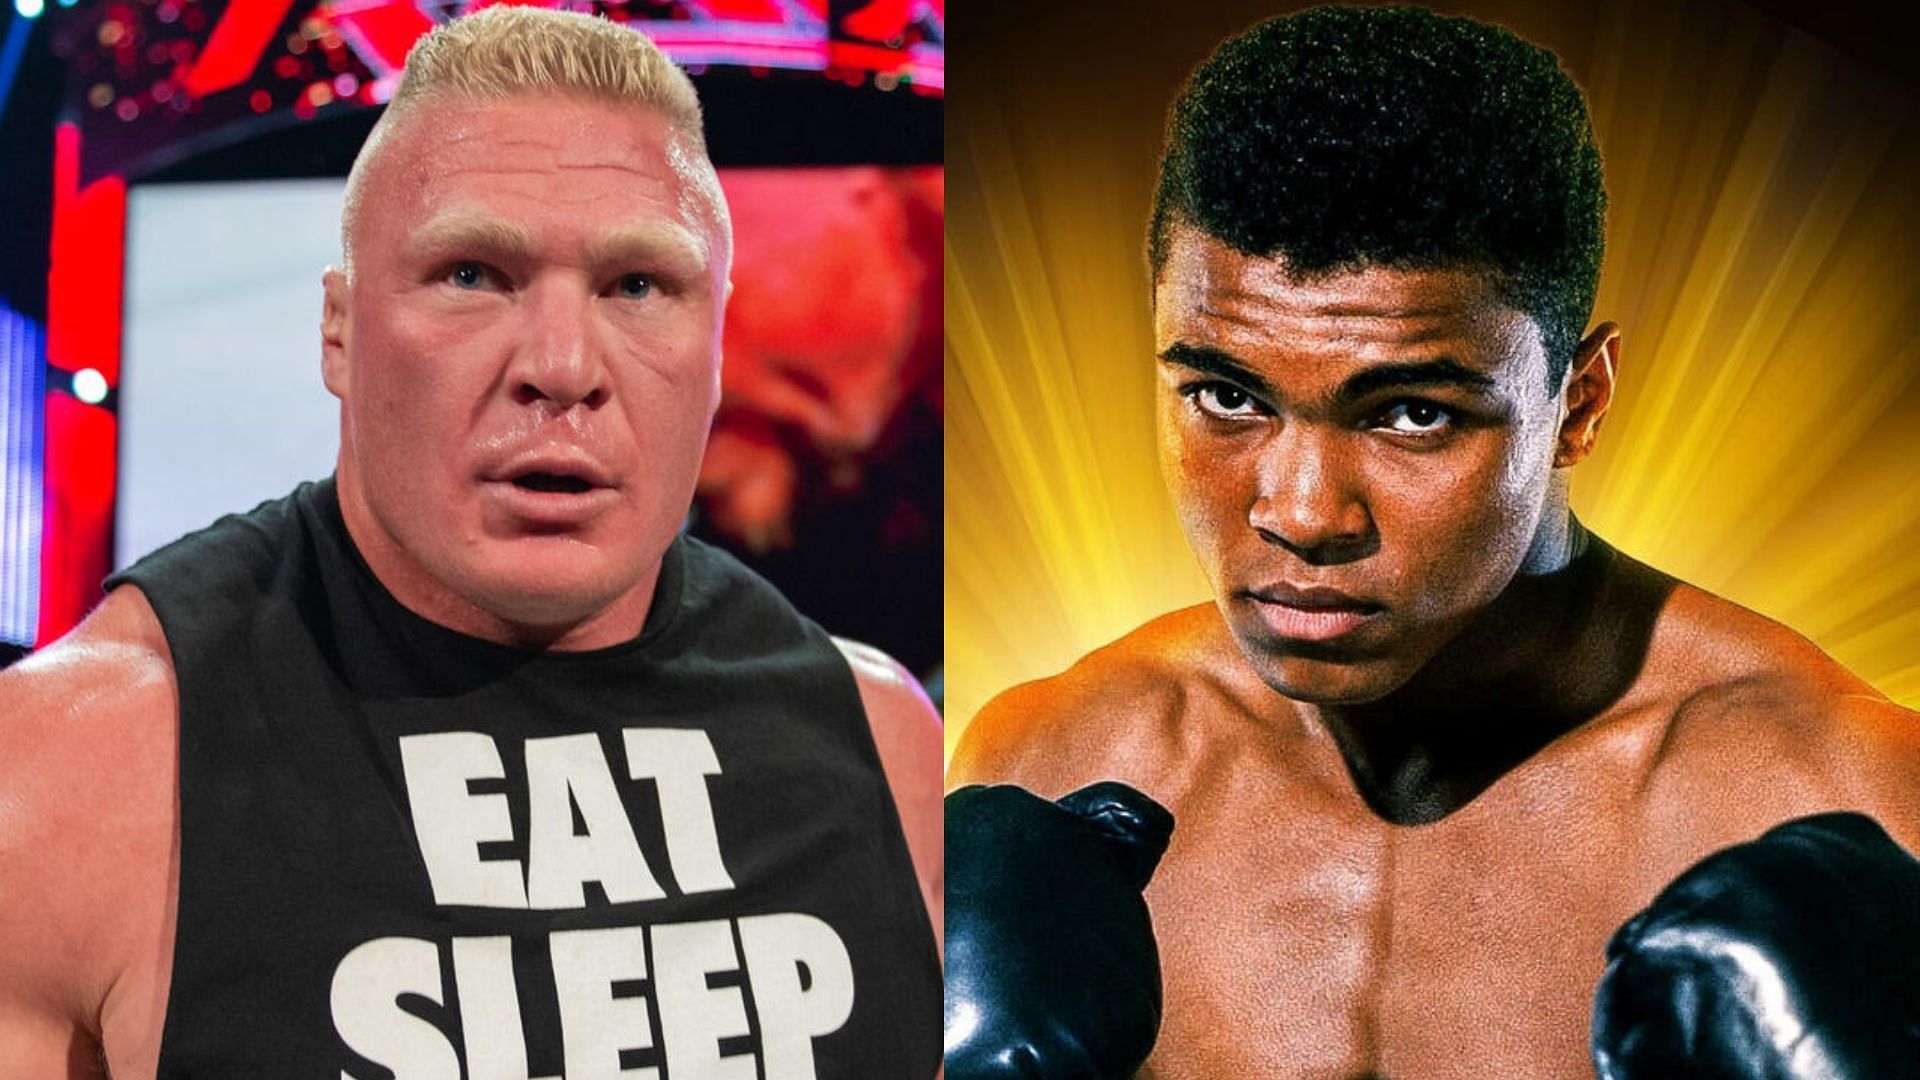 Brock Lesnar and Muhammad Ali are two of the greatest athletes of all time